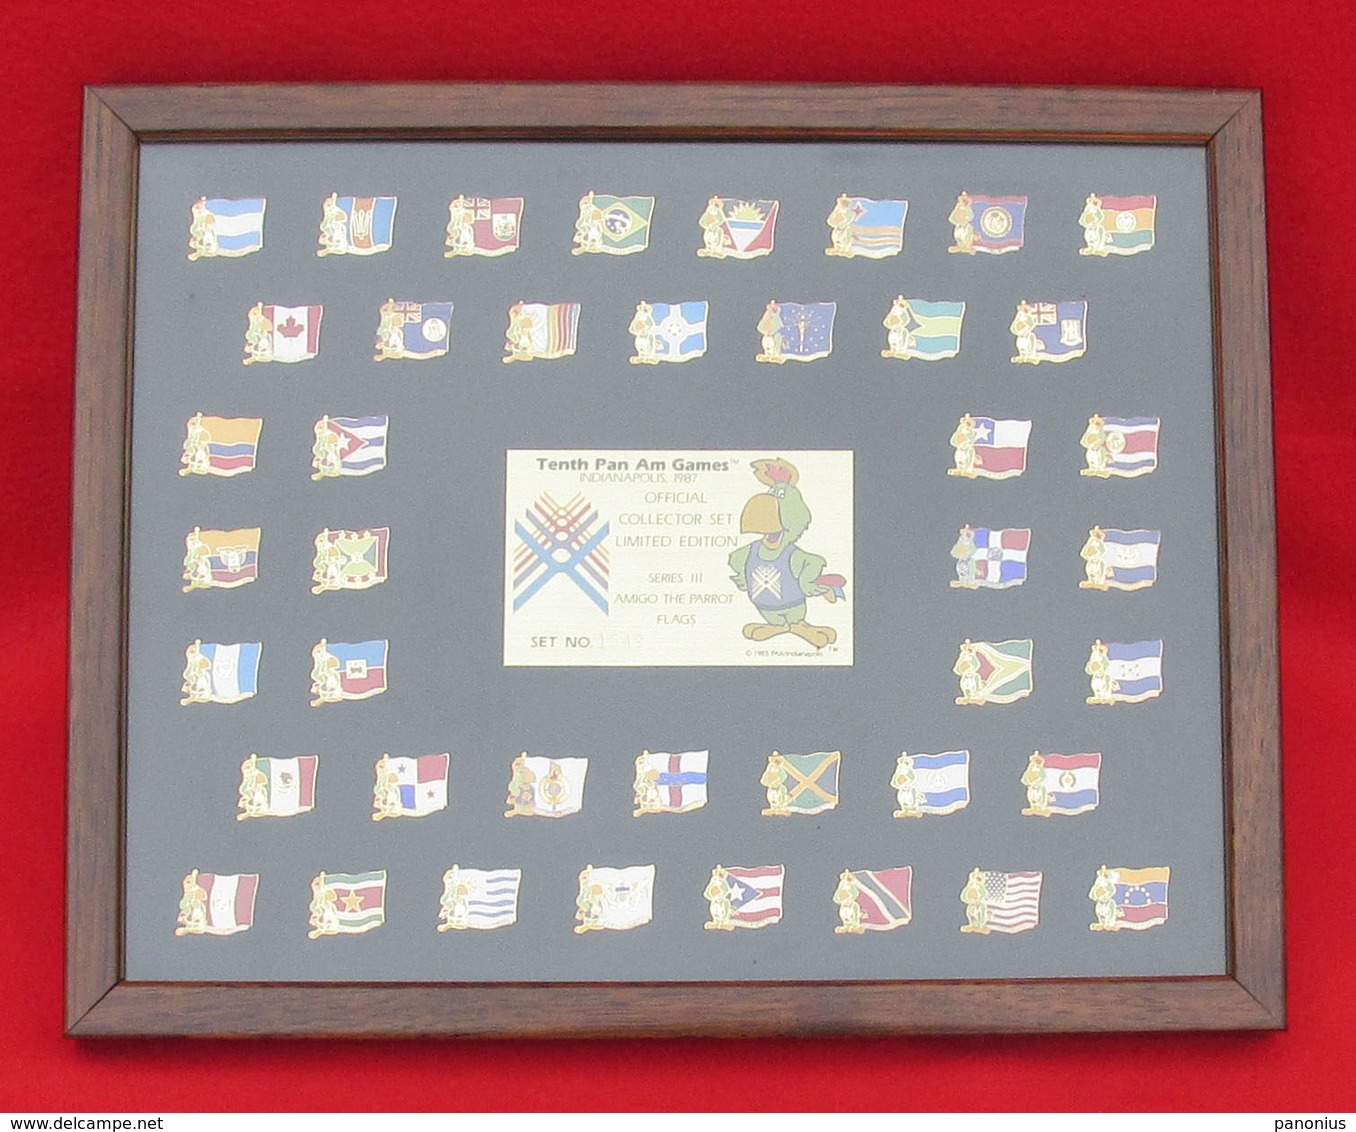 VINTAGE TENTH PAN AM GAMES INDIANAPOLIS UNITED STATES 1987 COLLECTOR SET FRAMED PINS BADGES!!! - Uniformes Recordatorios & Misc